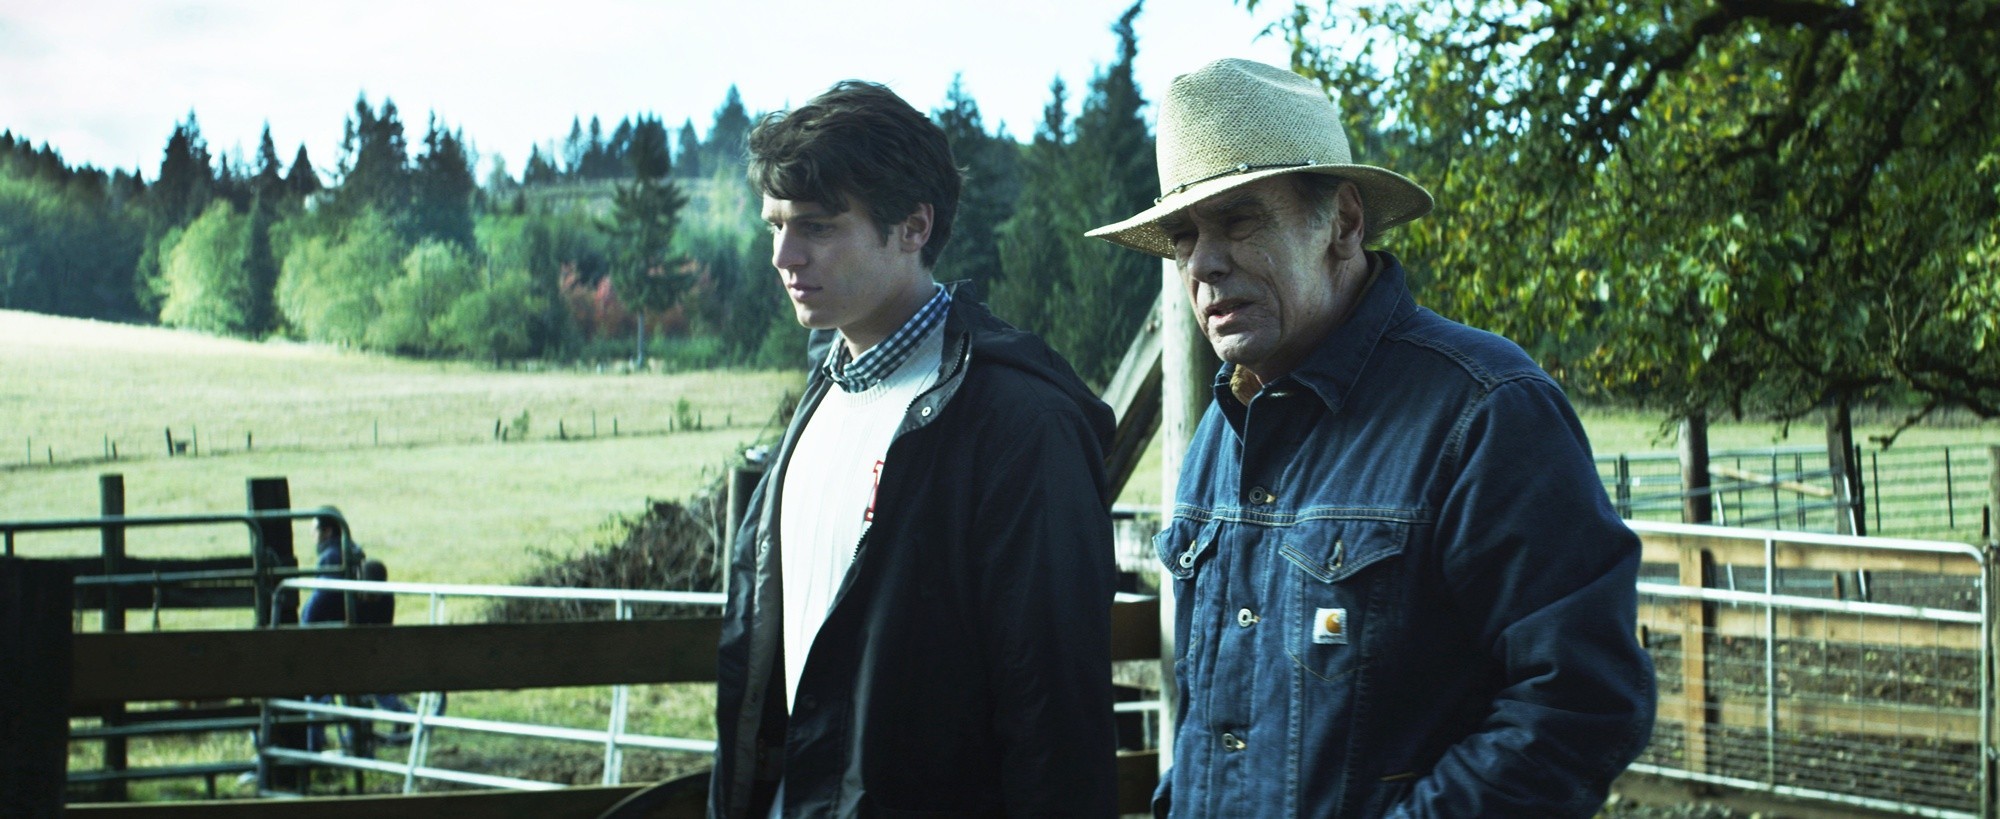 Jonathan Groff stars as Samuel and Dean Stockwell stars as Hobbs in Screen Media Films' C.O.G. (2013). Photo credit by David King.